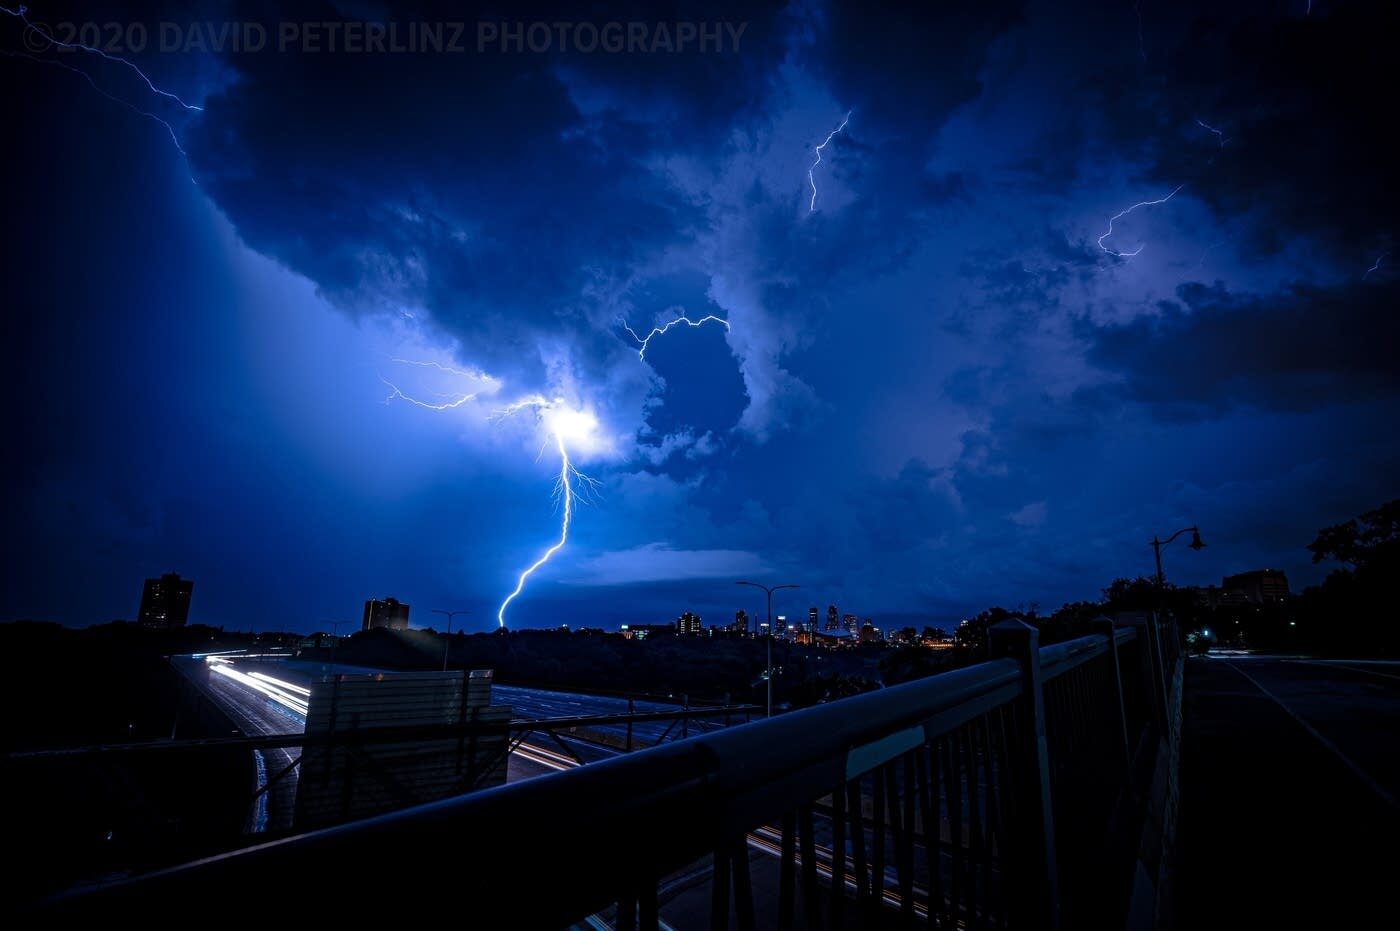 Overnight storms sparked nearly continuous lightning and thunder for much of the night across the Twin Cities metro area. This was the view from the Dartmouth Bridge near the University of Minnesota in Minneapolis.